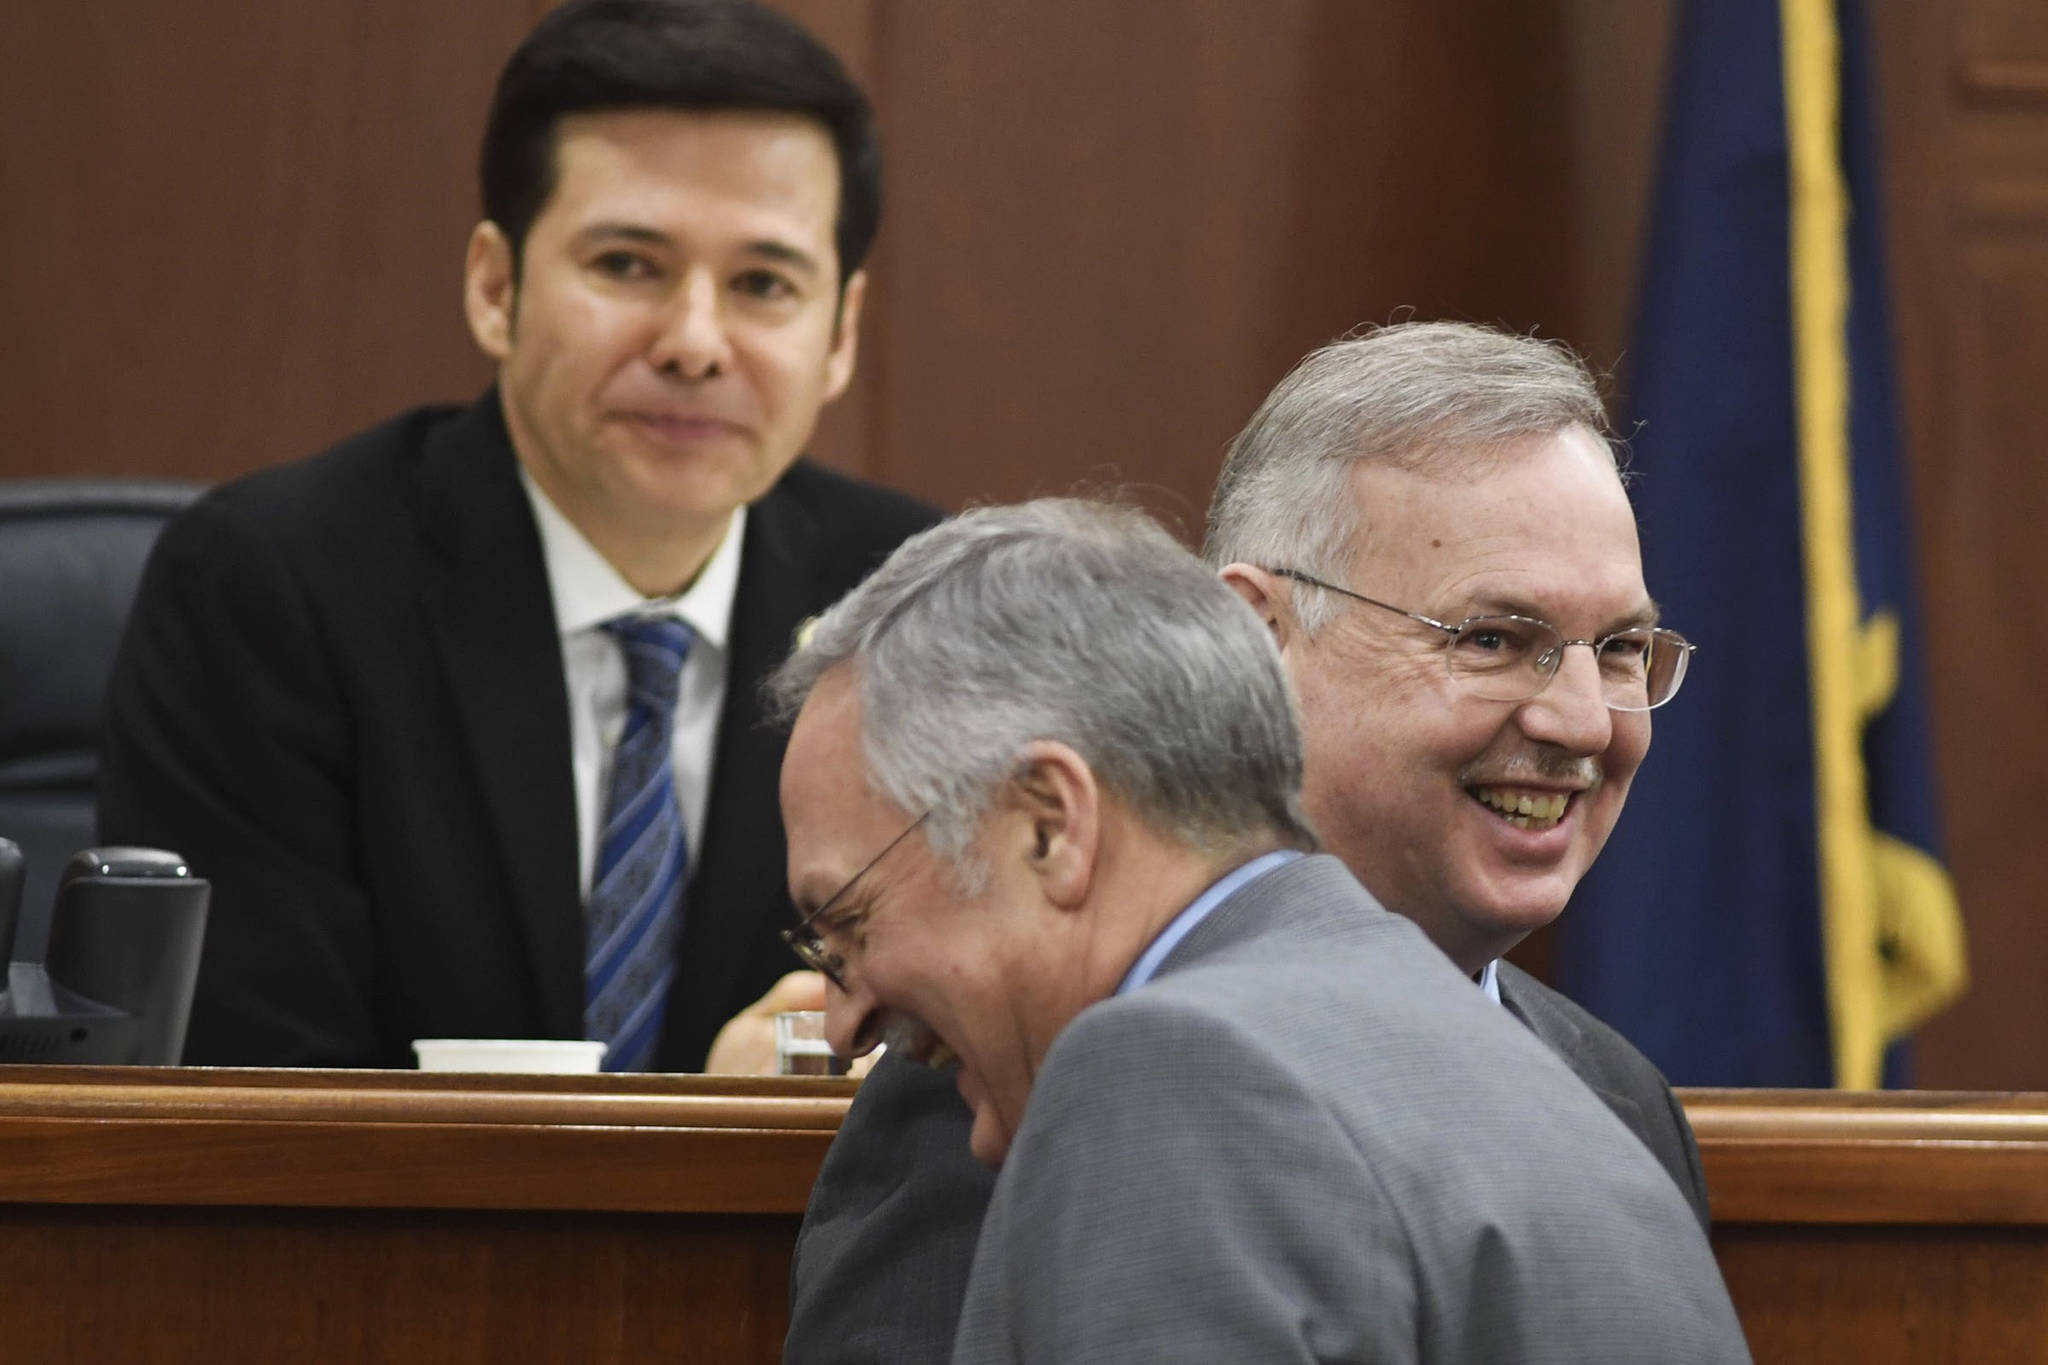 Former Speaker of the House Rep. Bryce Edgmon, D-Dillingham, right, shares a laugh with Speaker nominee Rep. David Talerico, R-Healy, at Speaker Pro Tempore Rep. Neal Foster, Nome, resides over the House on Monday. The House continues in a stalemate to organize permanent leadership. (Michael Penn | Juneau Empire)